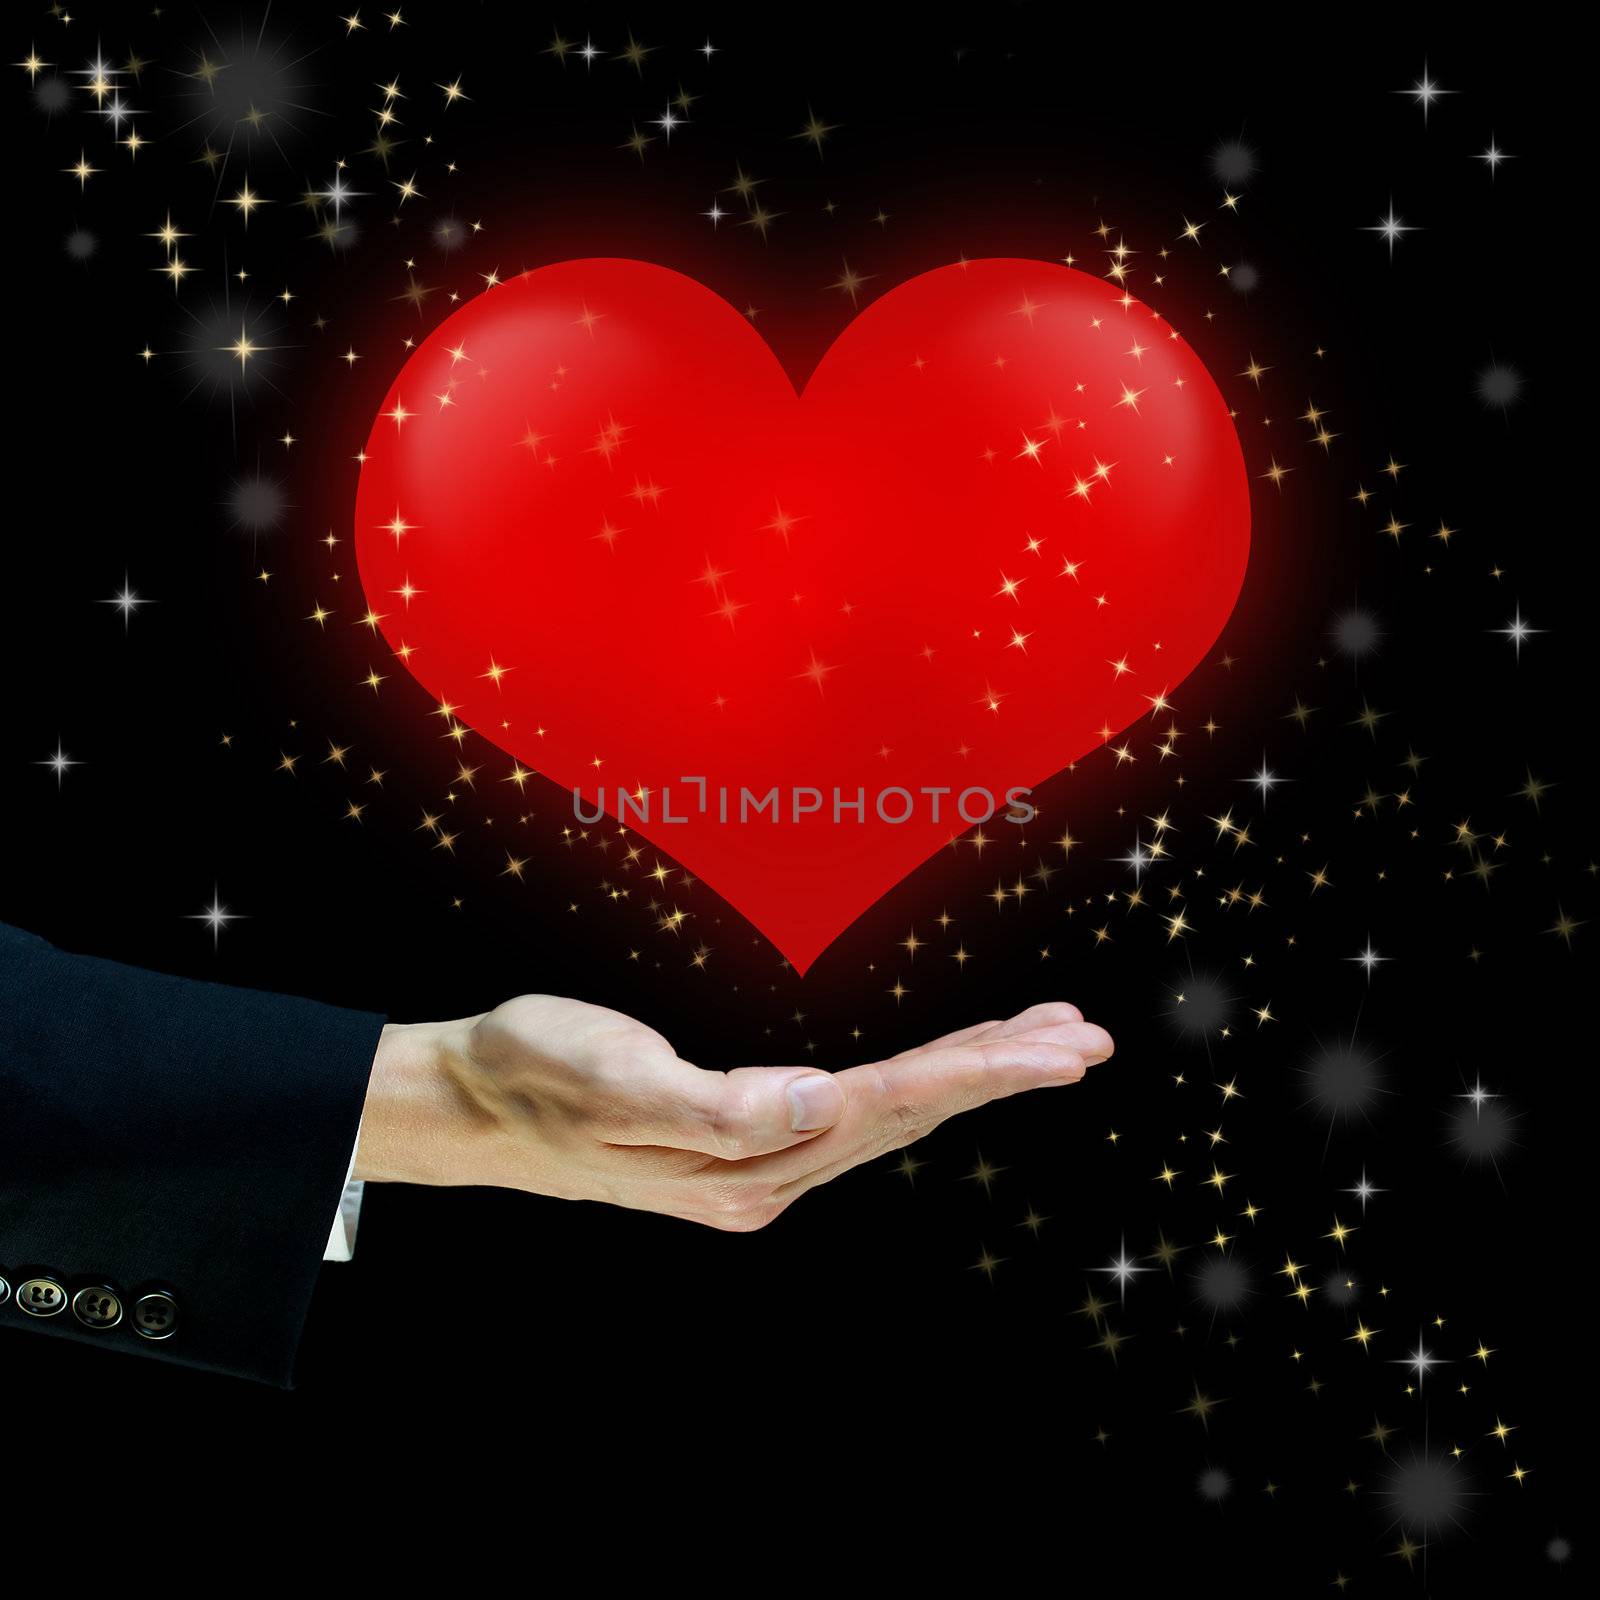 Red heart floating over a hand on black background with star dusts